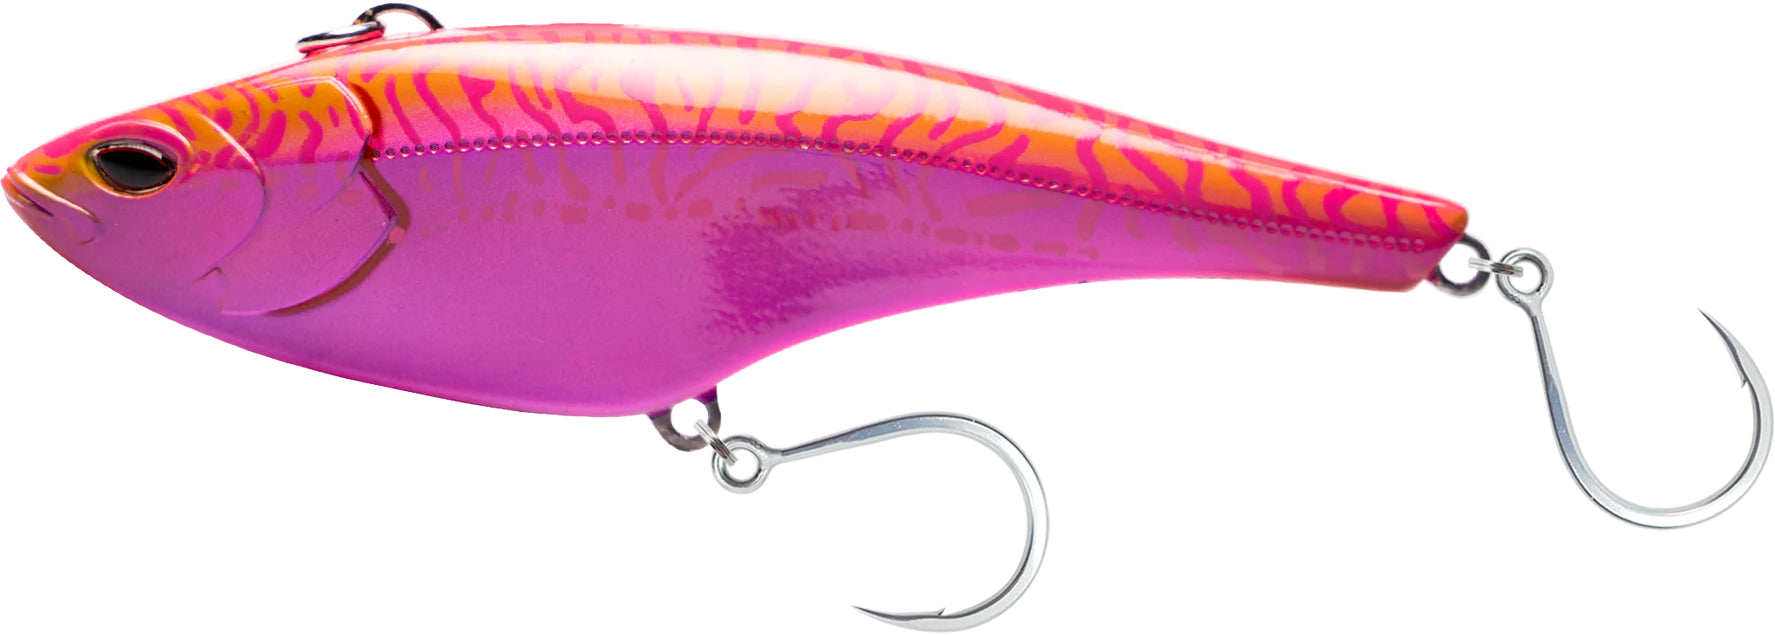 Nomad Design Madmacs 200 High Speed Sinking Trolling Lure - 7.825